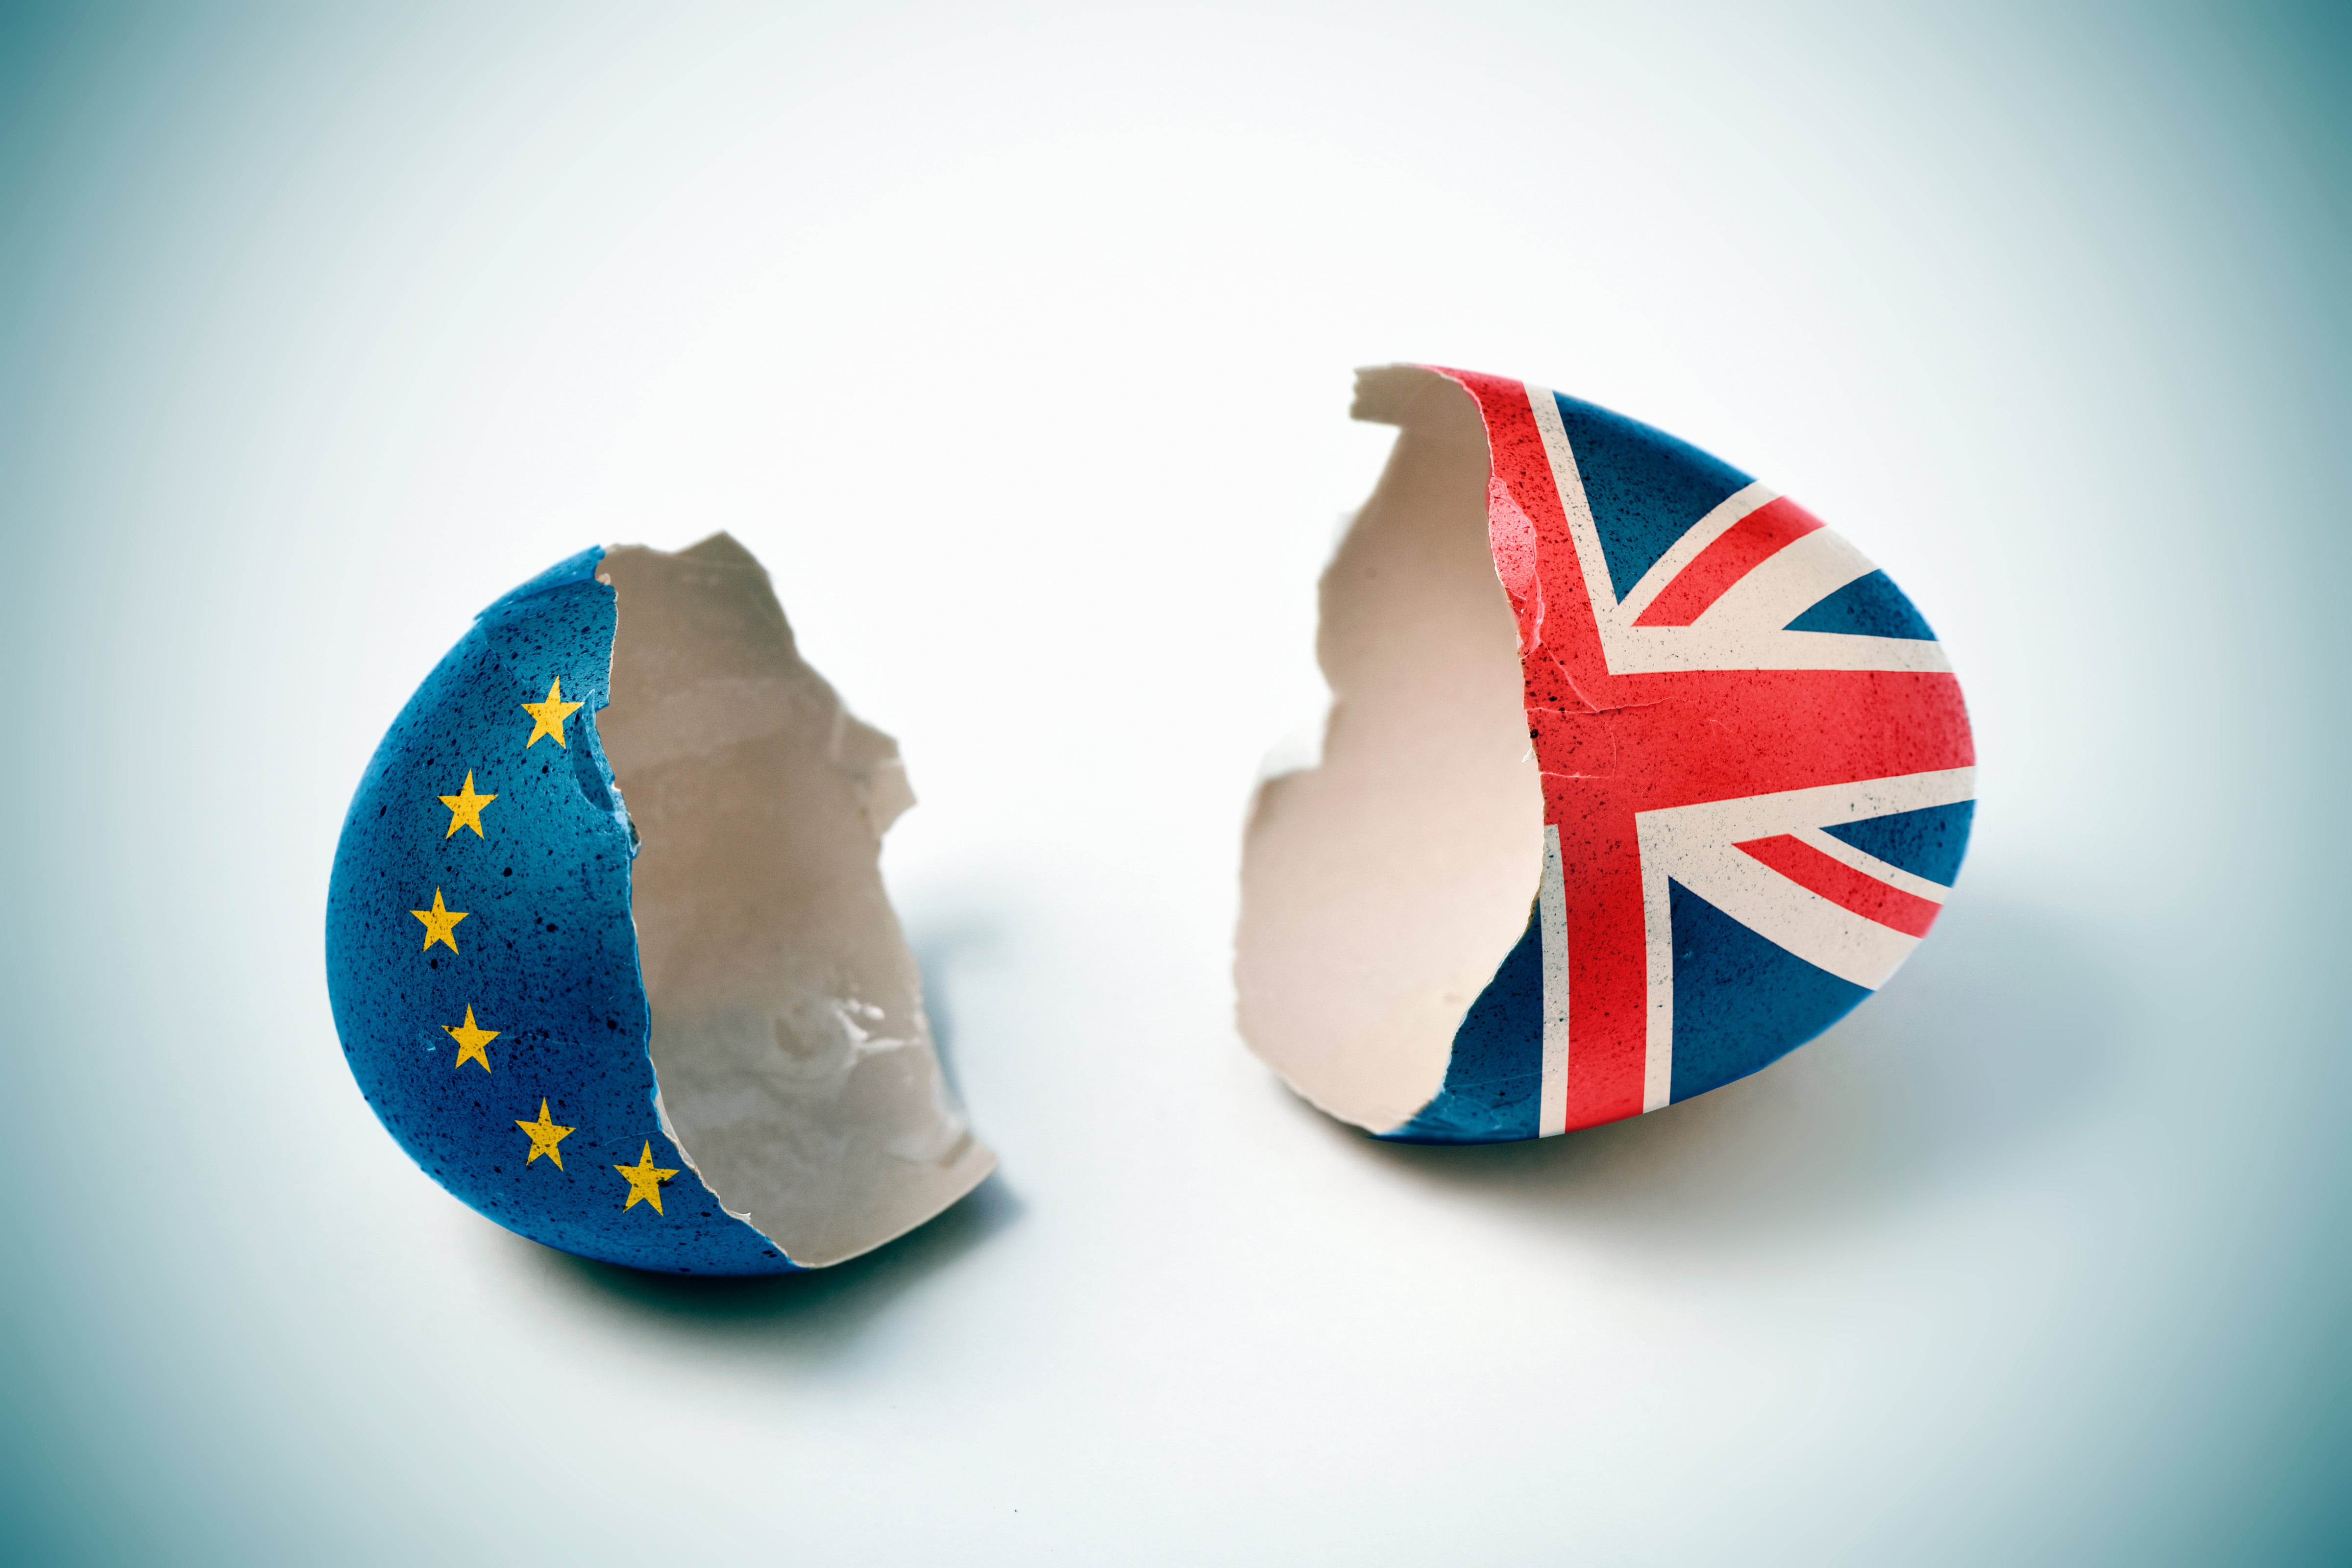 image of a broken egg representing the EU and the UK.